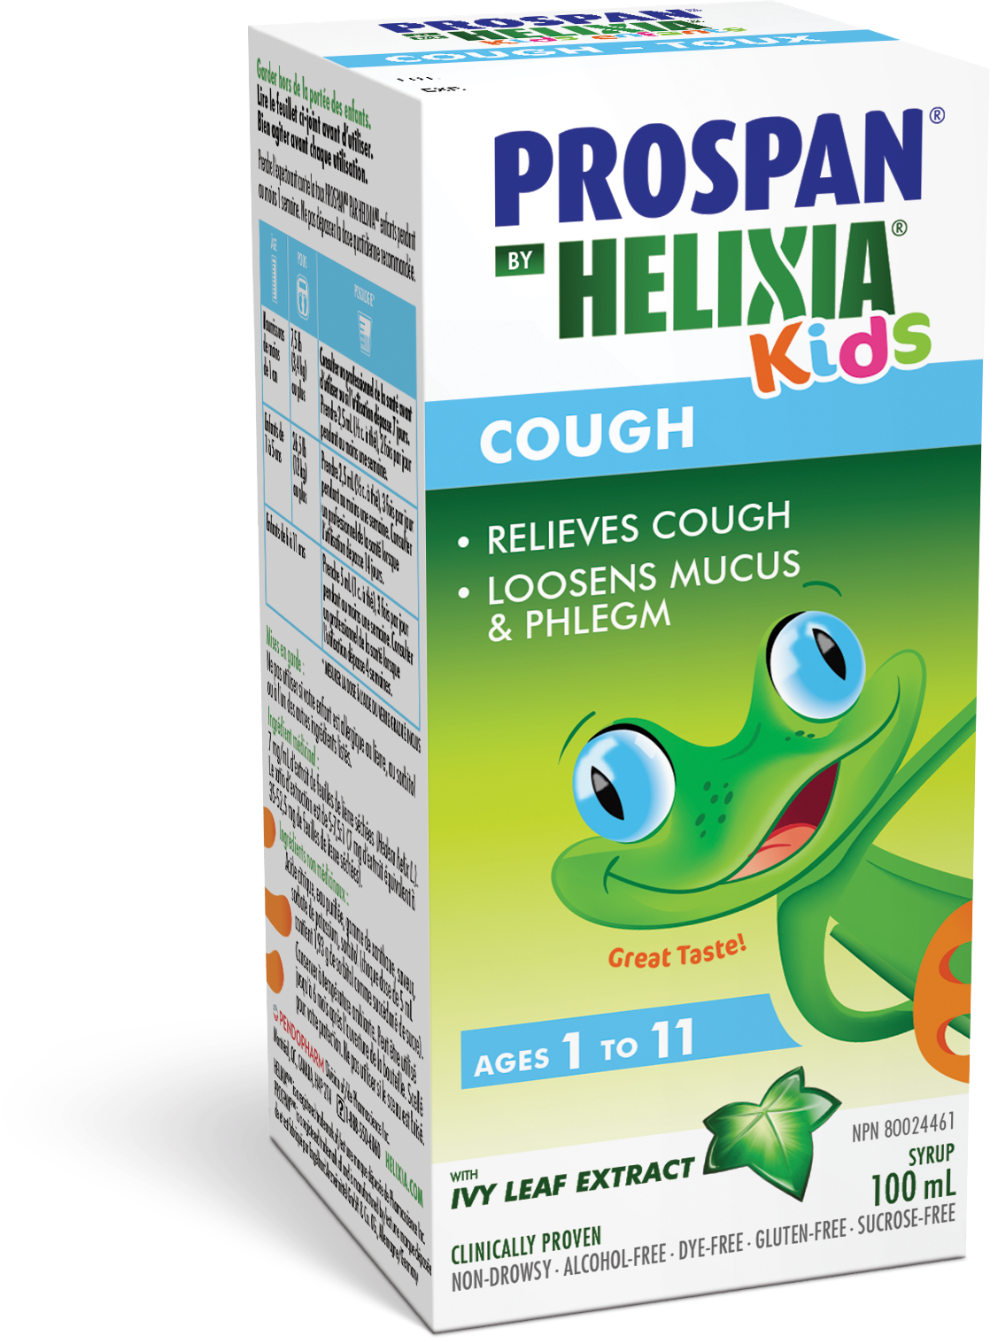  PROSPAN BY HELIXIA COUGH SYRUP - KIDS